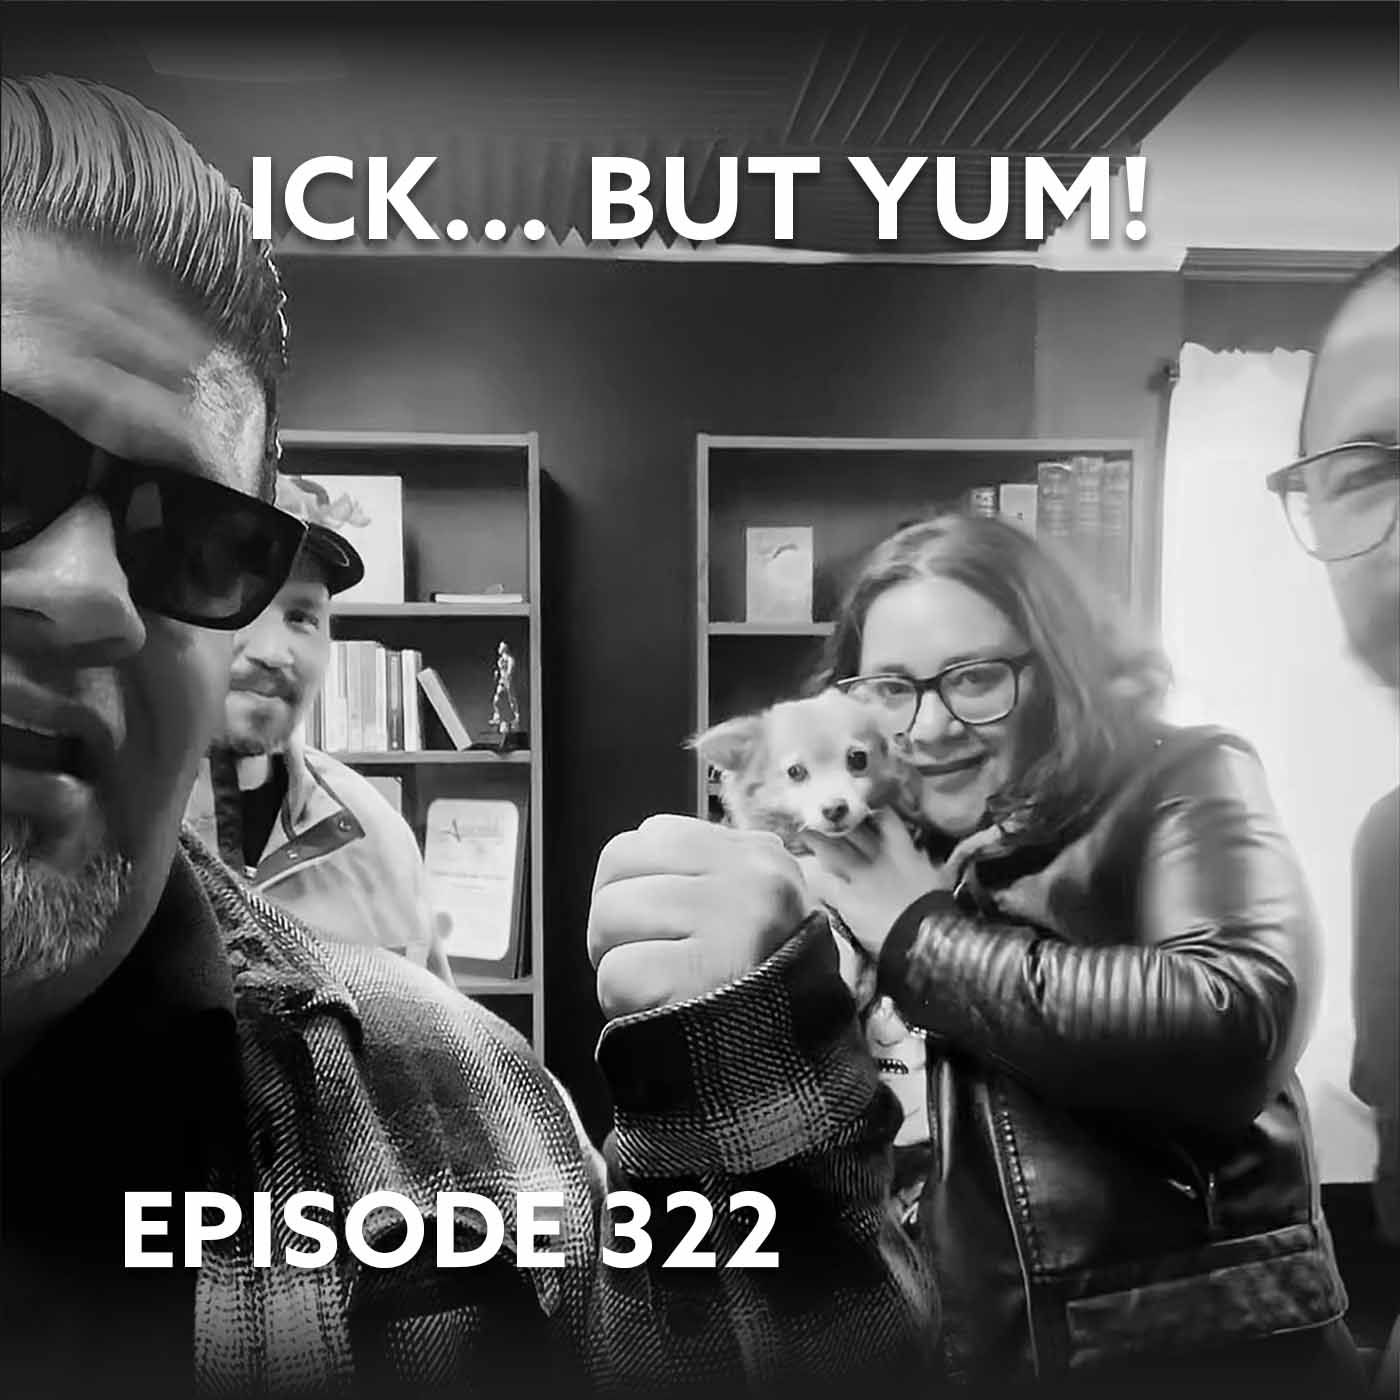 Episode 322 – Ick… But Yum!